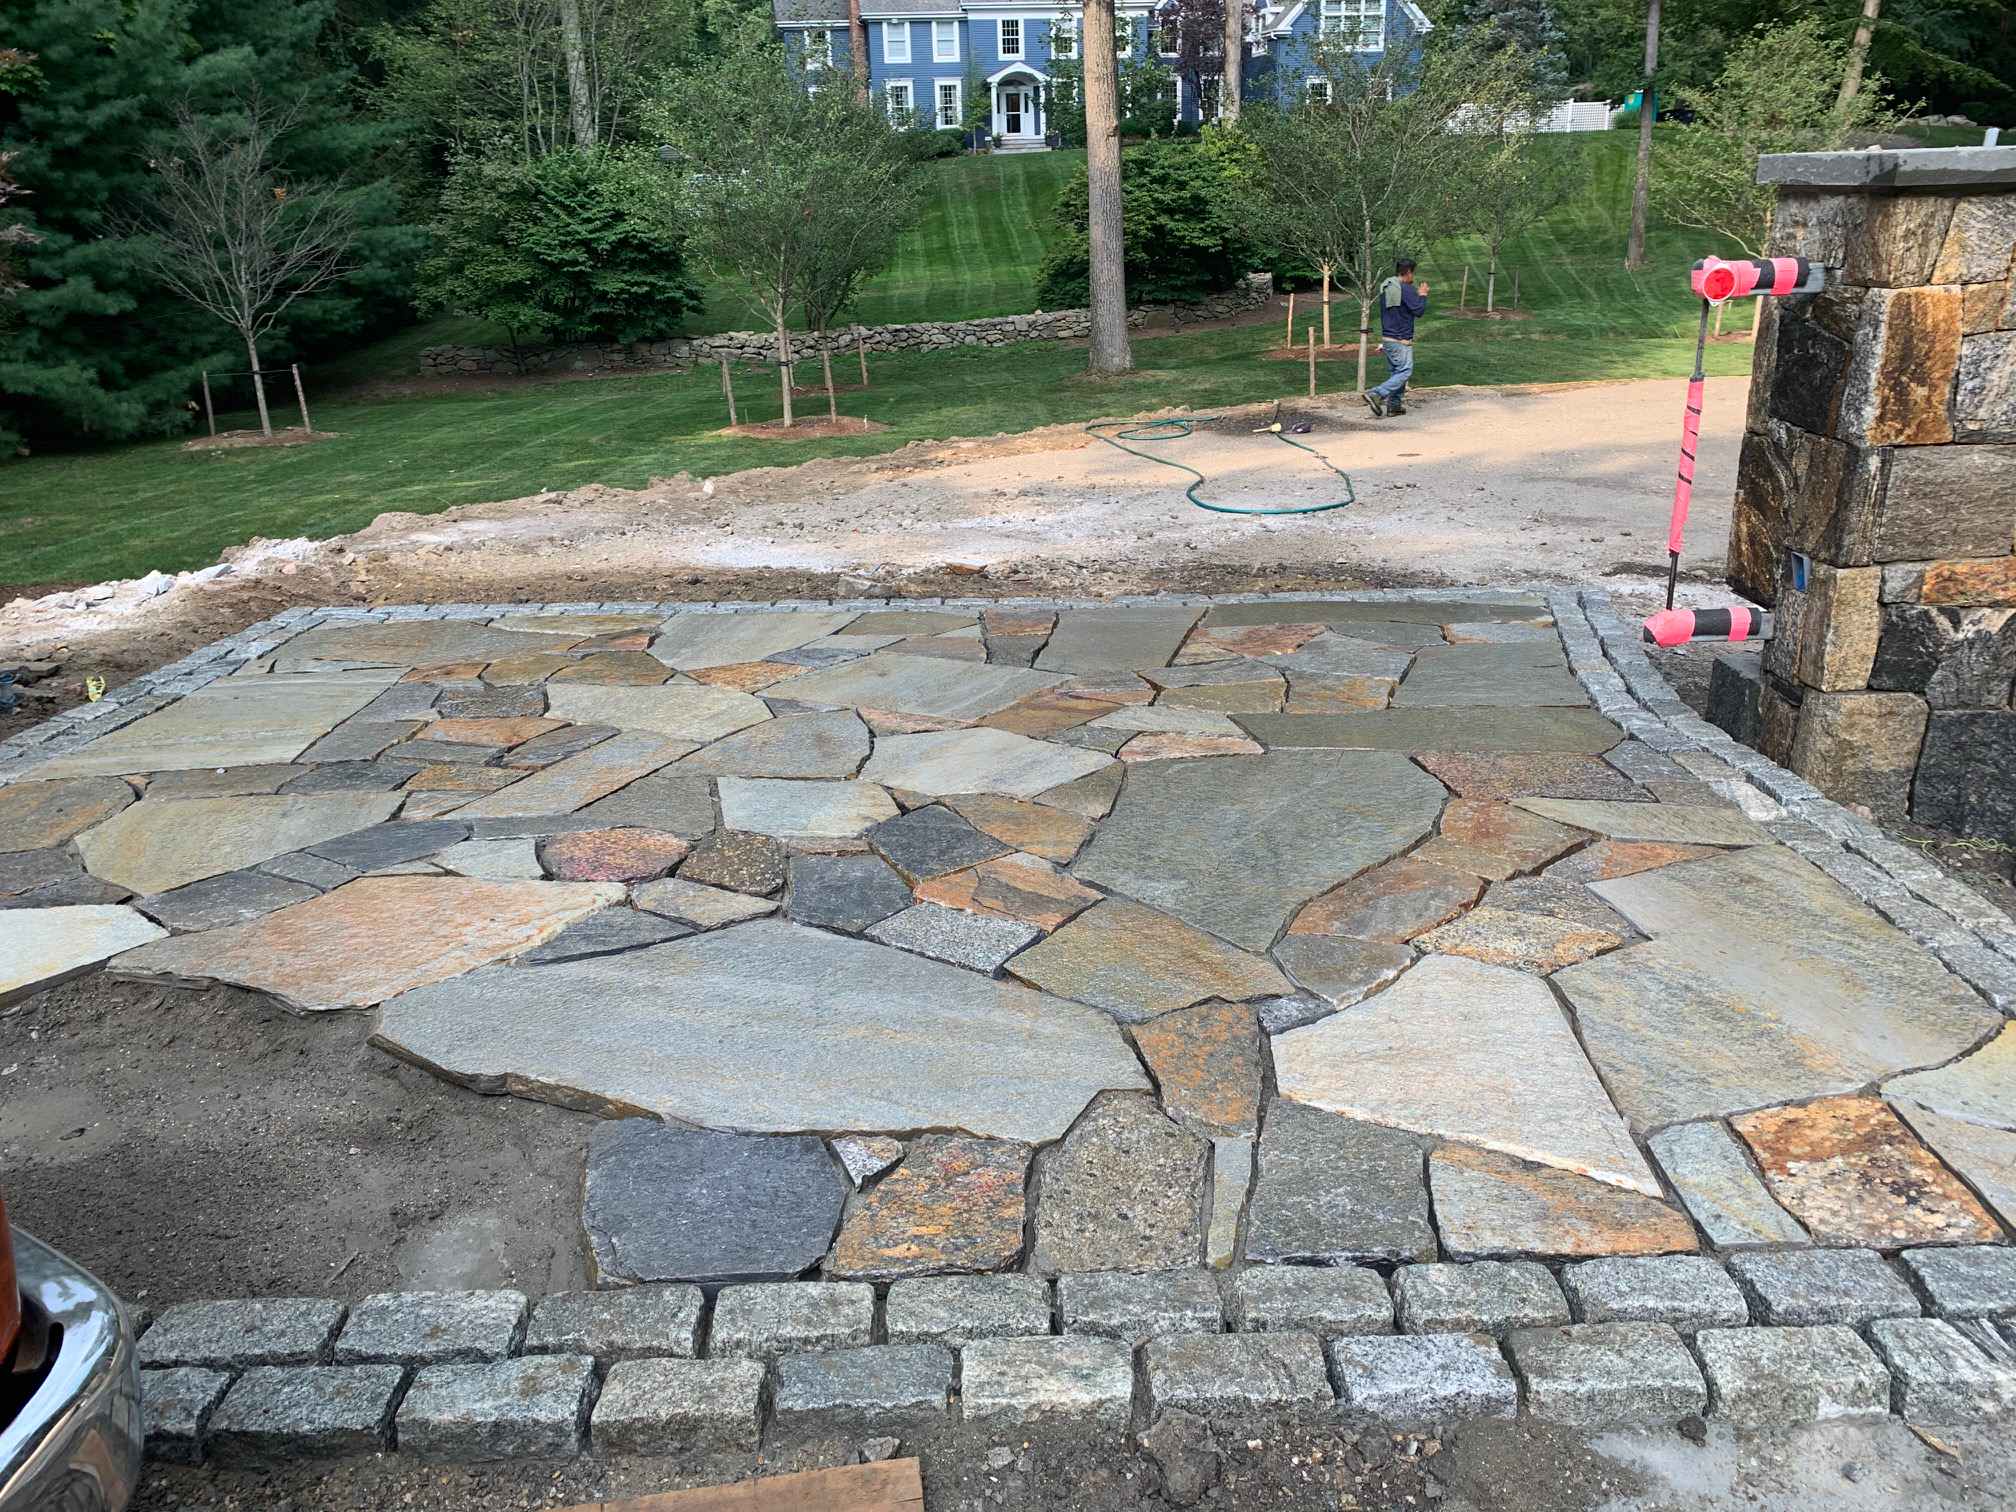 Pound Ridge, NY Driveway Gate using a geometric design for this country estate. Design and Project Management Peter Atkins. Masonry by in house masonry team.  Late Summer 2020